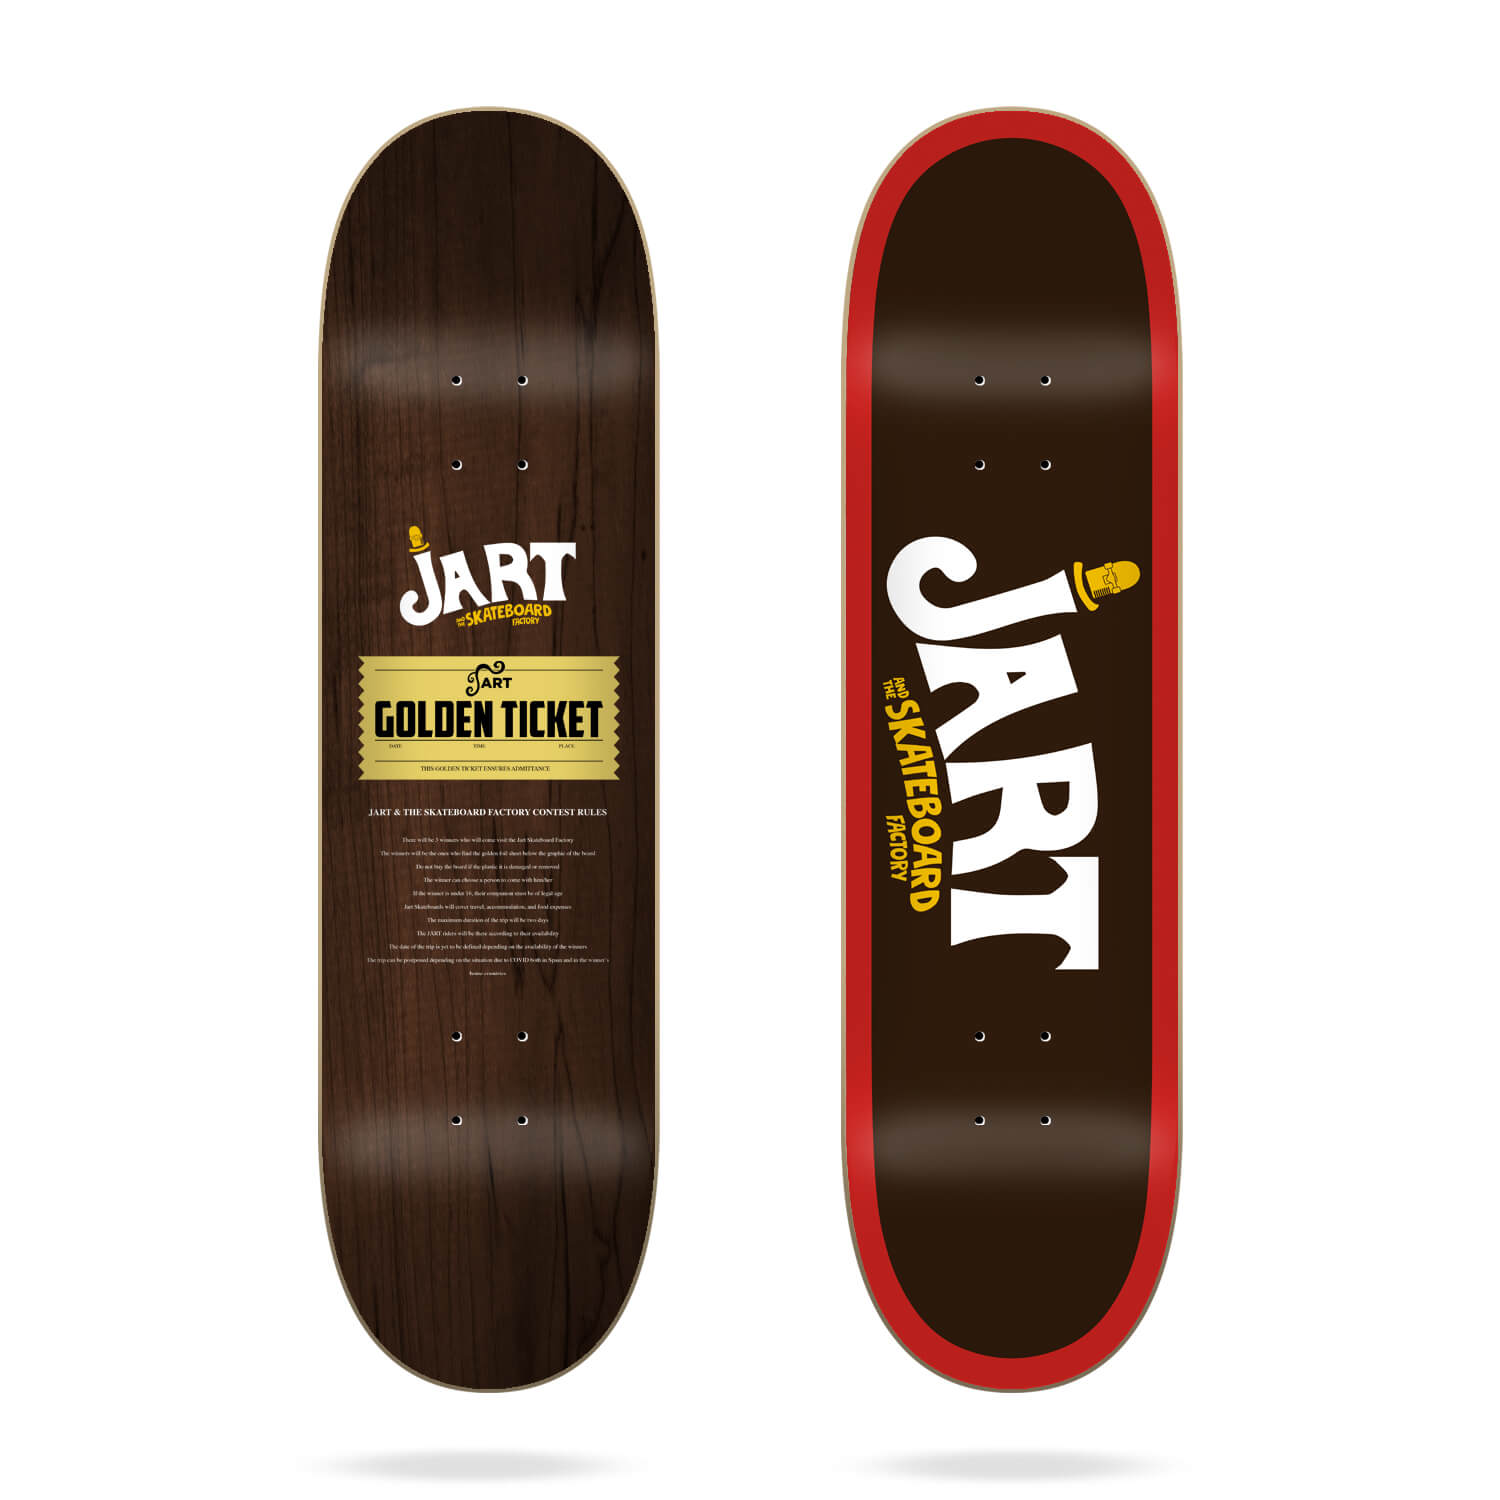 Jart And The Skateboard Factory 8.25" deck